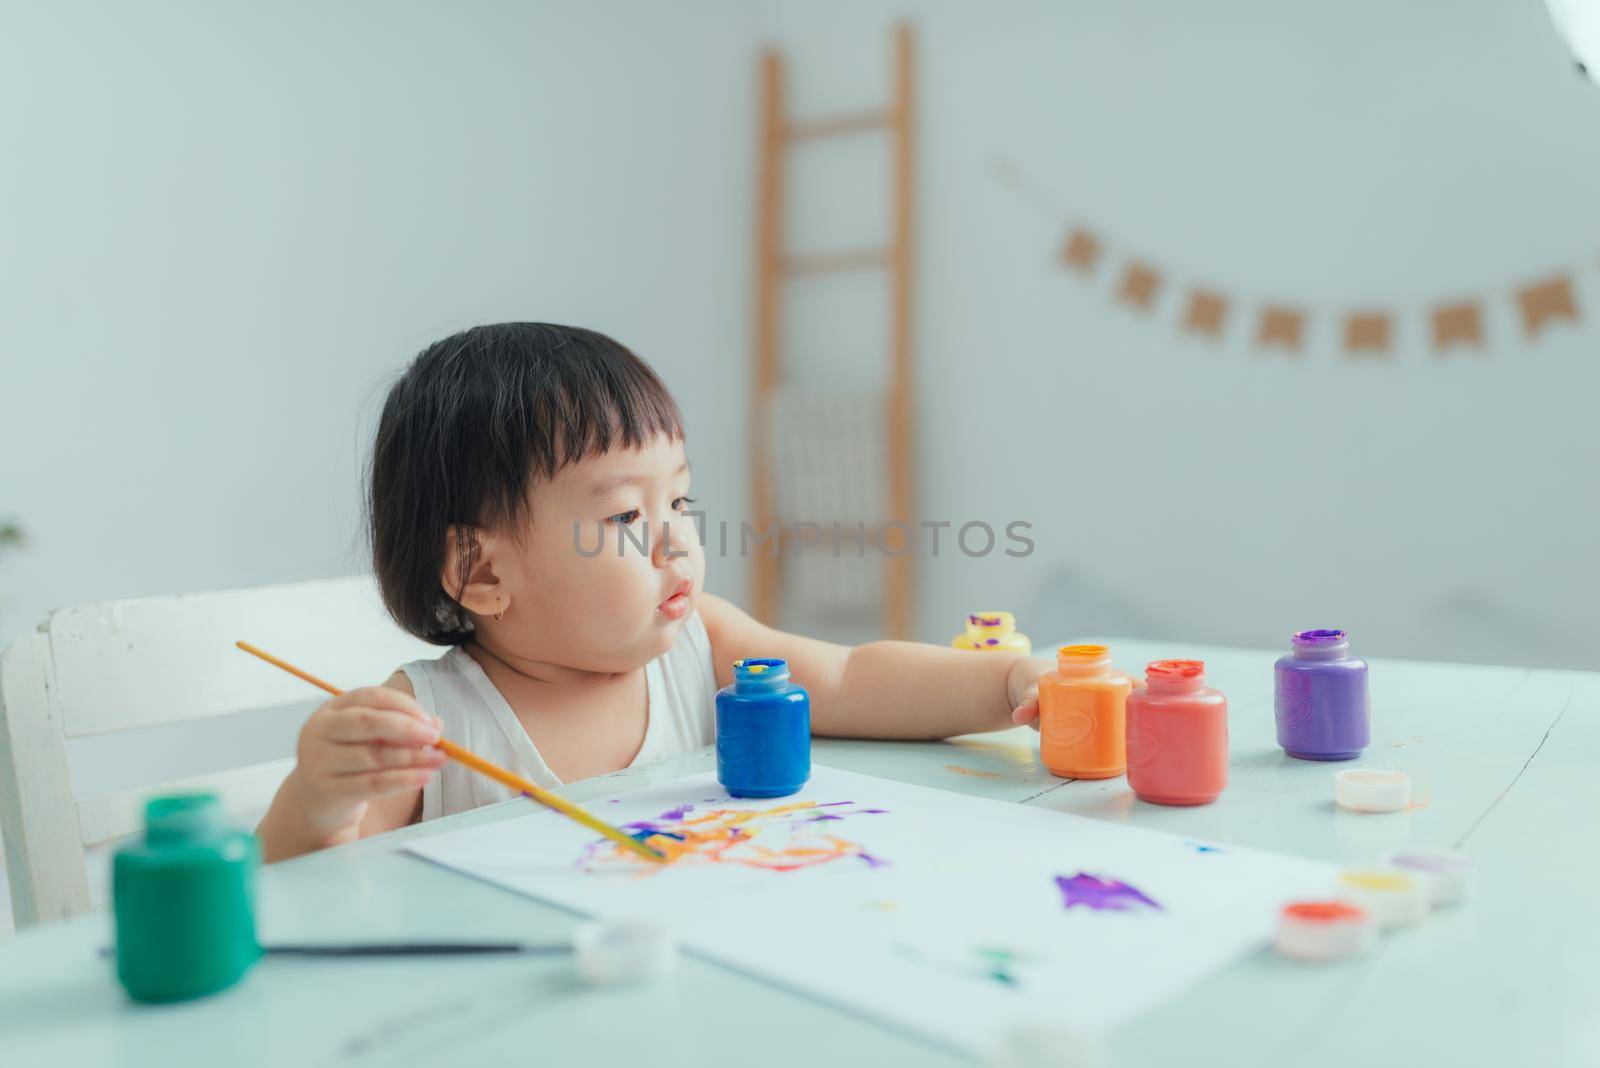 Water color painting activity concept play from home for corona virus protection by makidotvn